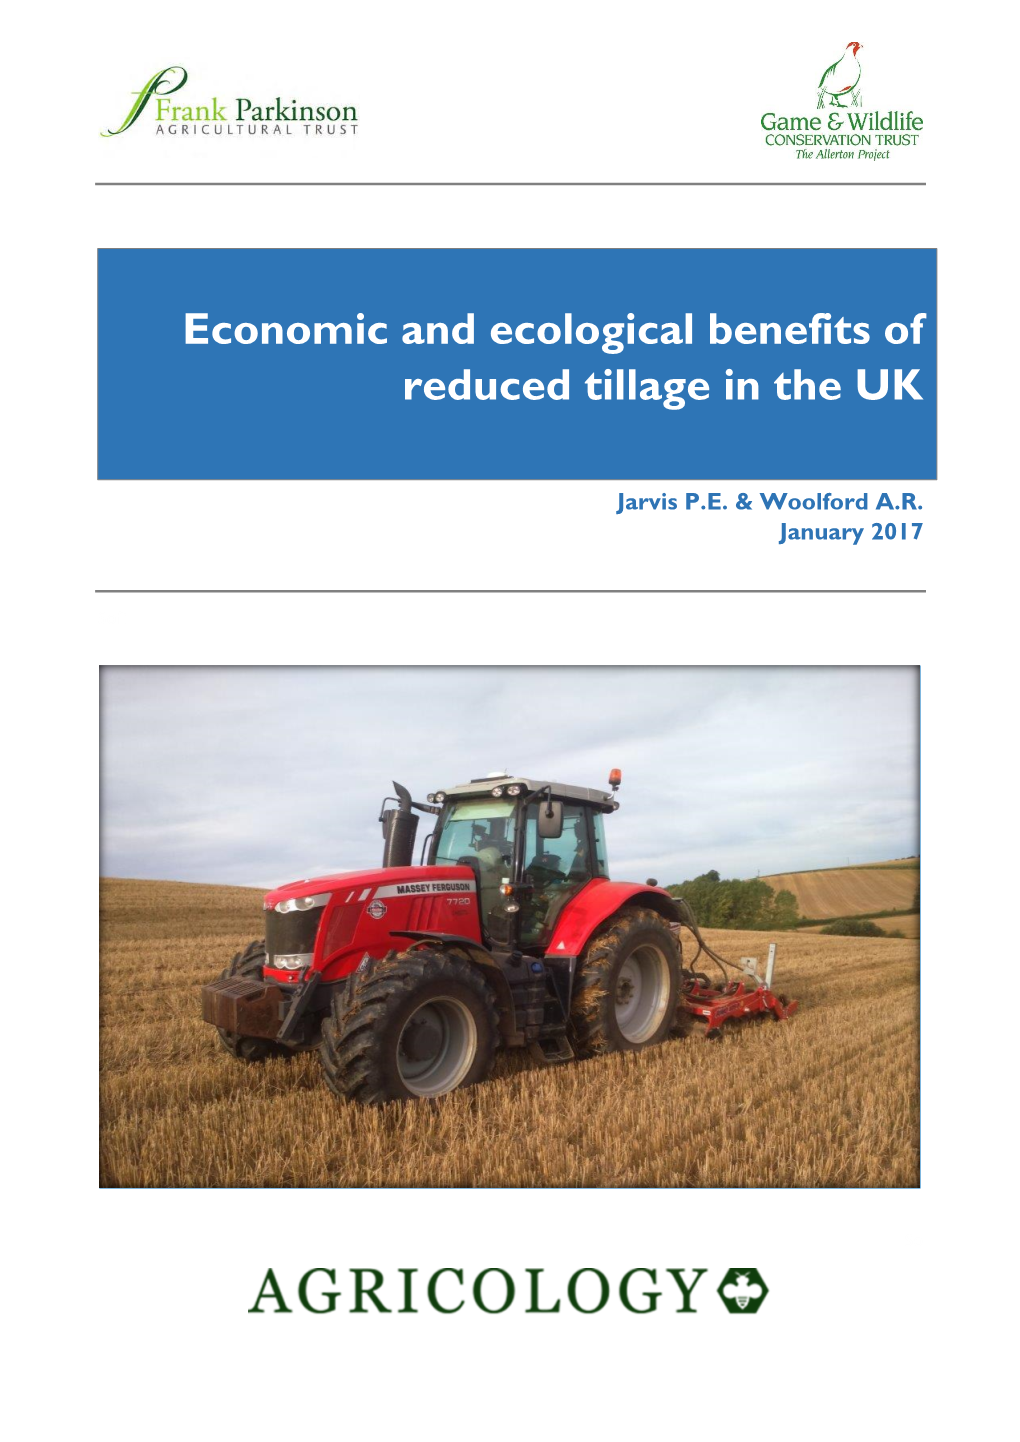 Economic and Ecological Benefits of Reduced Tillage in the UK